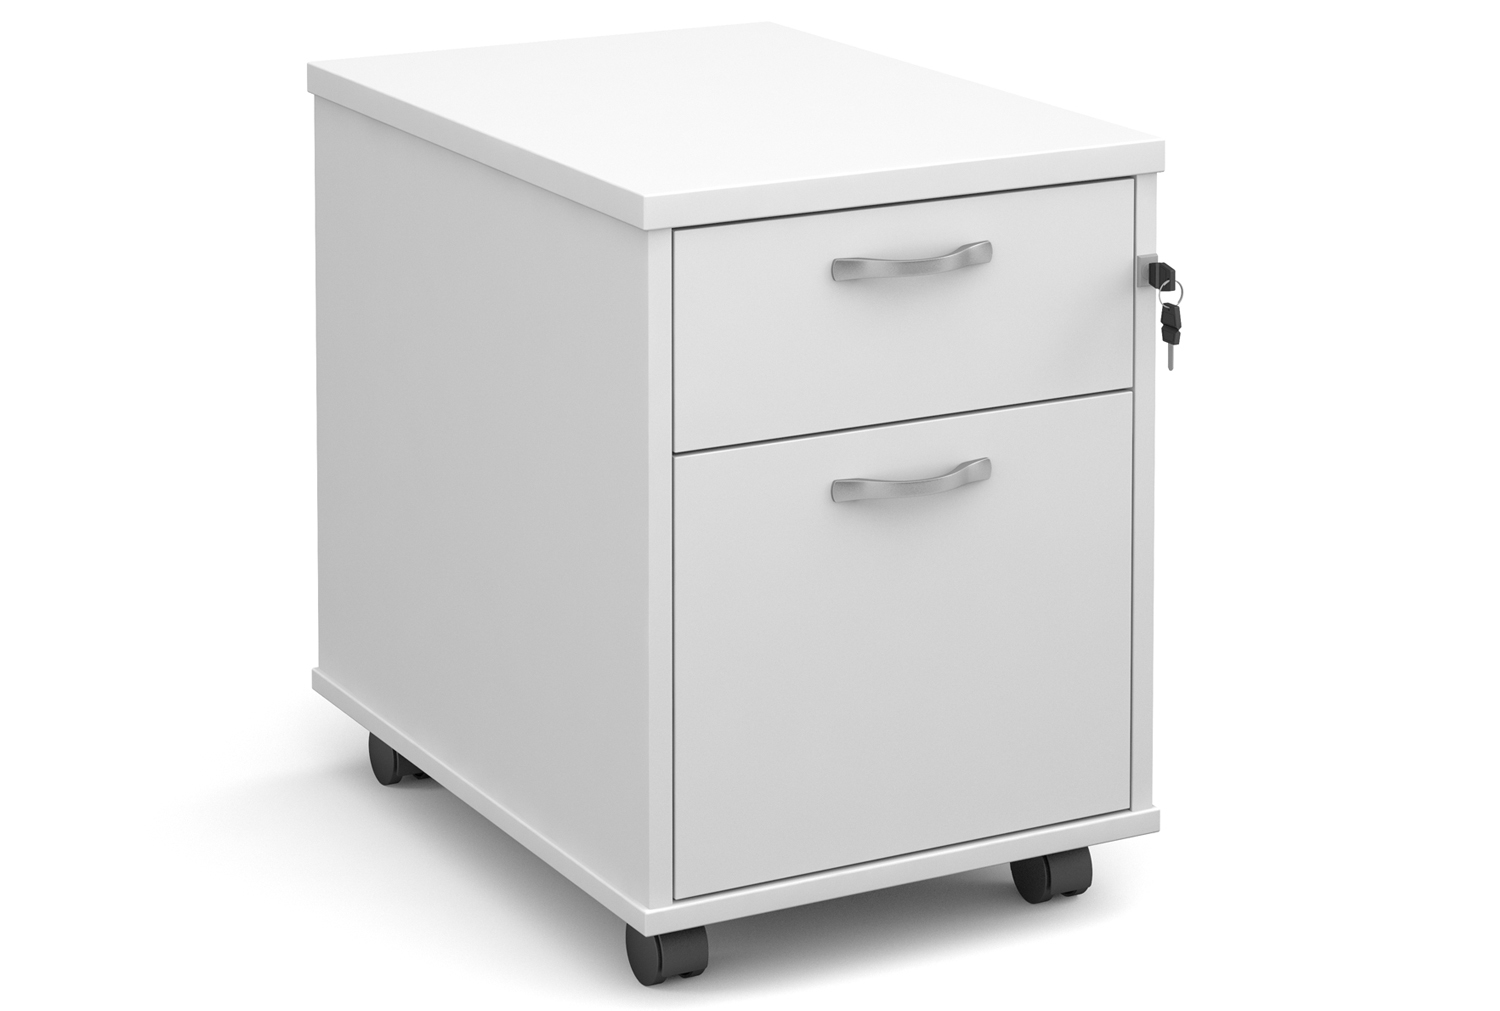 Thrifty Next-Day Mobile Pedestal White, 2 Drawer - 43wx60dx57h (cm), Express Delivery